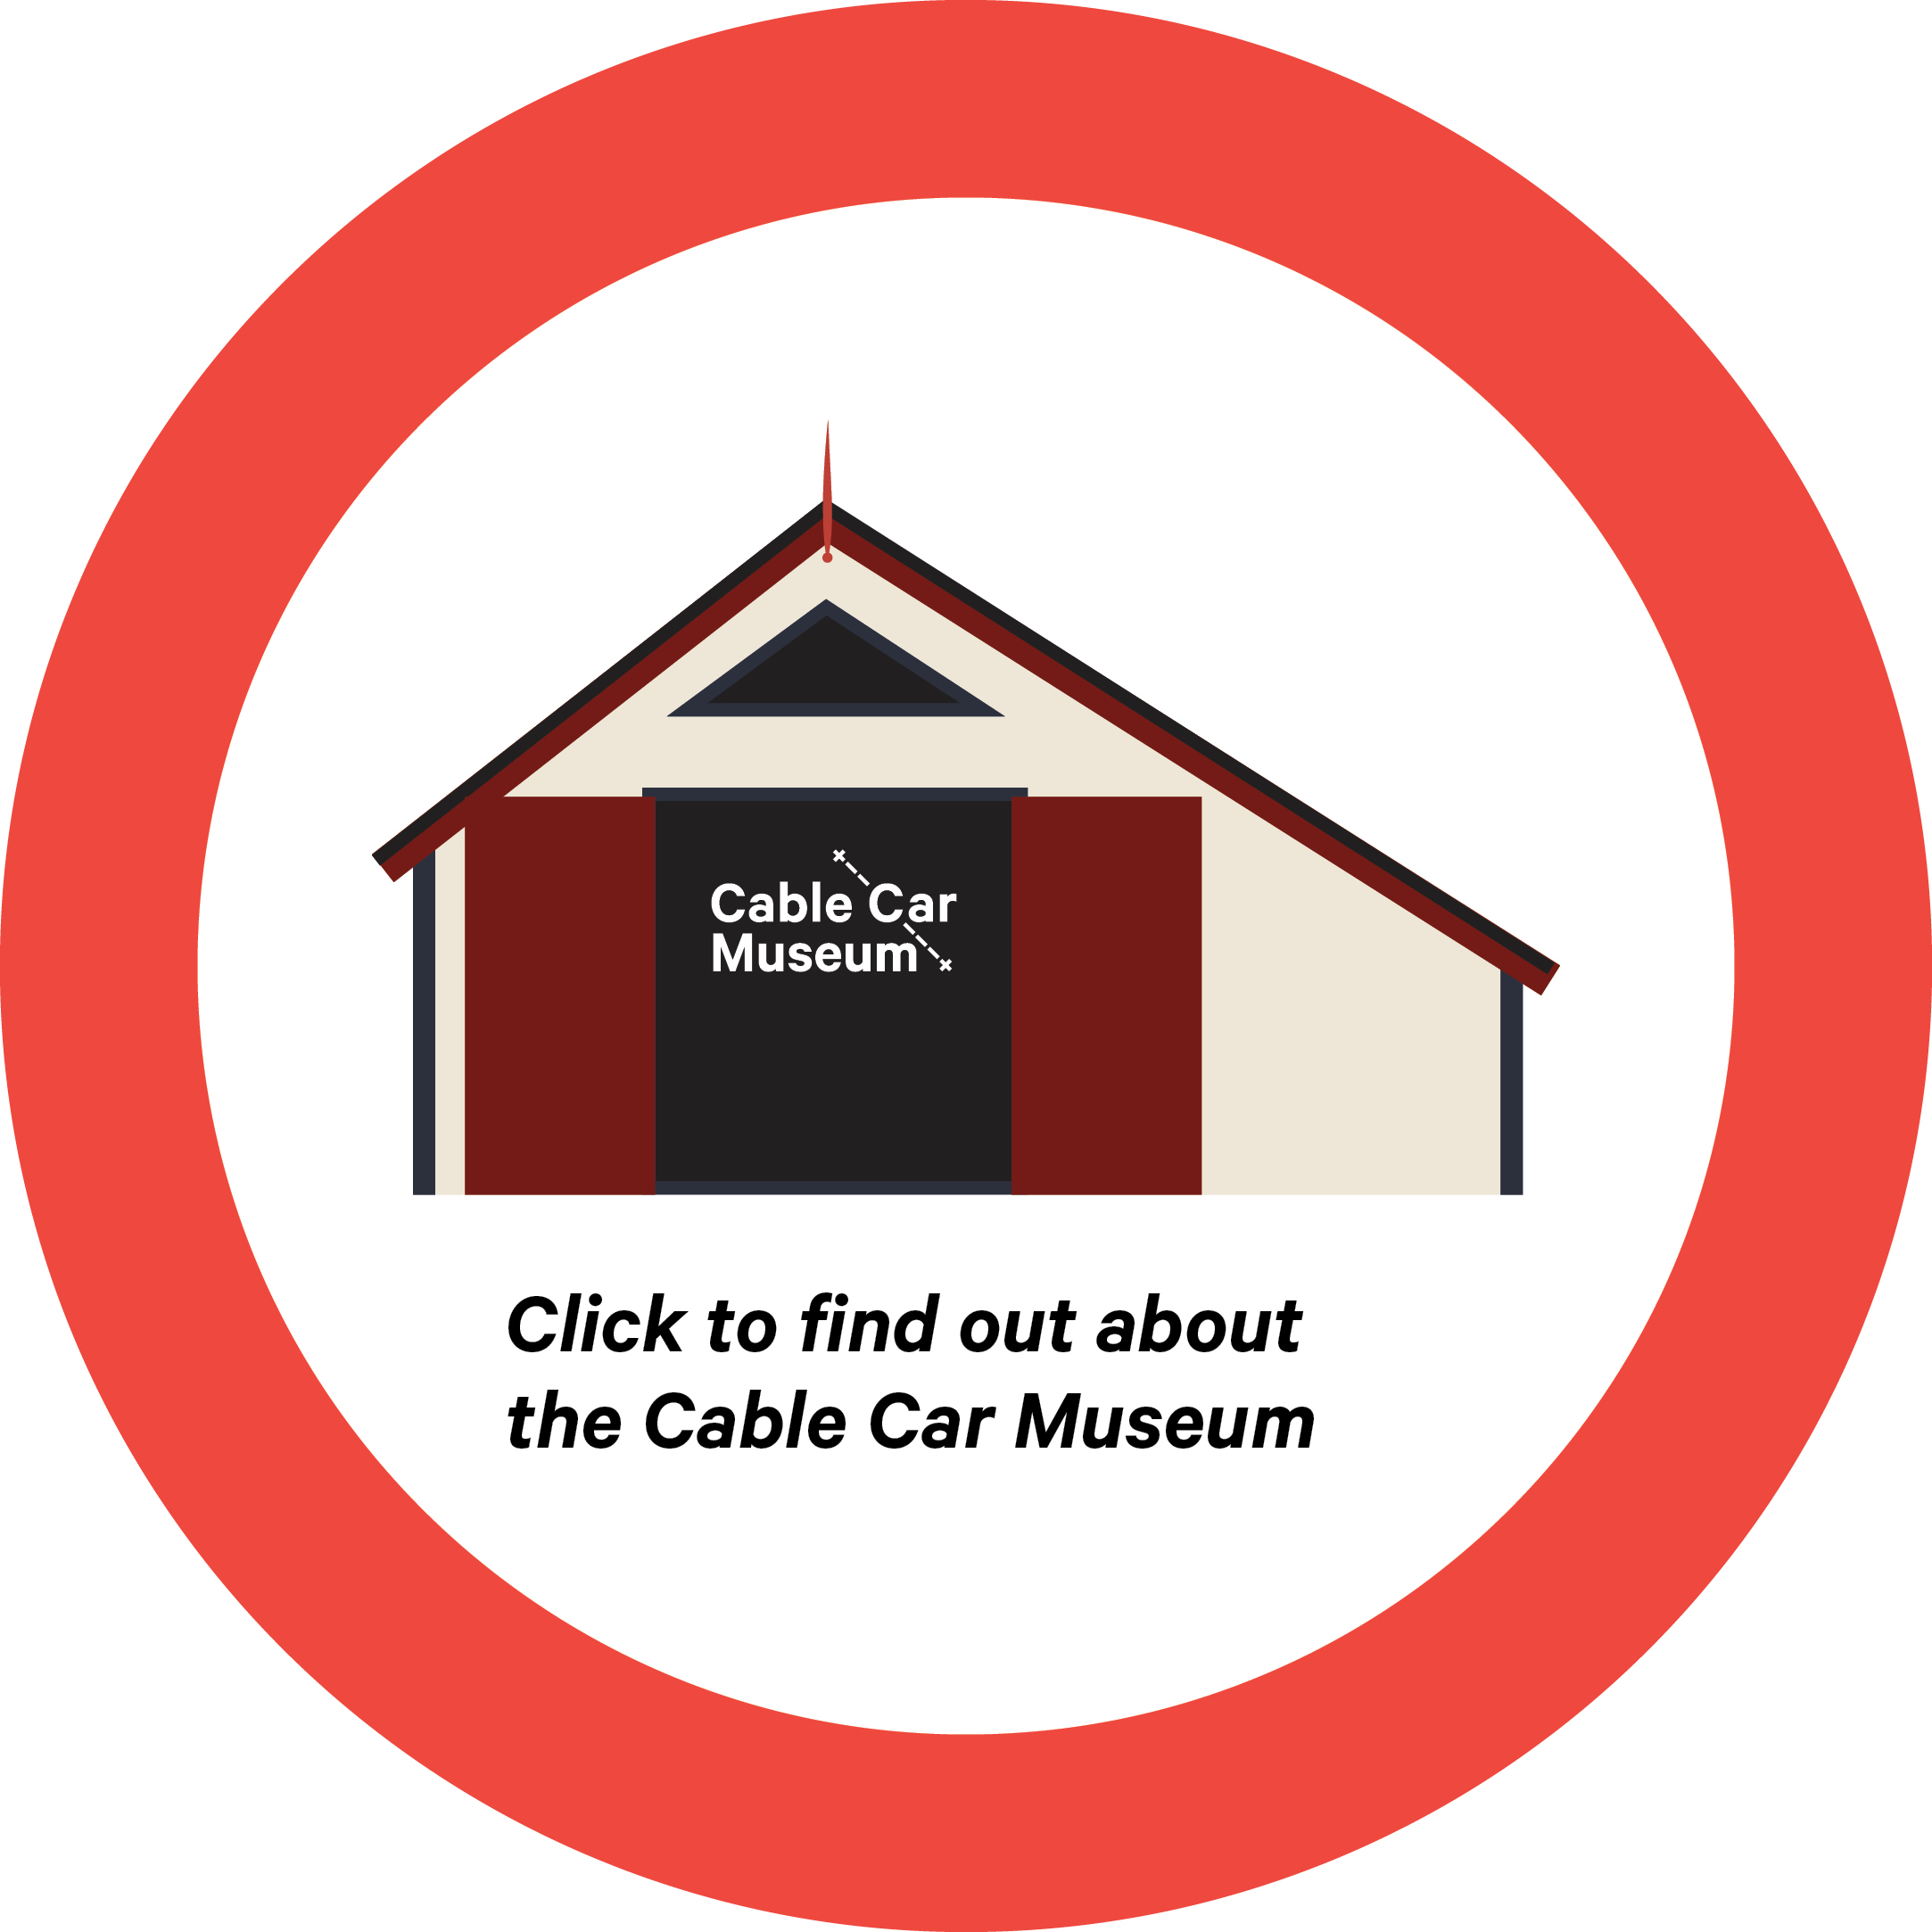 Cable Car Museum Illustration